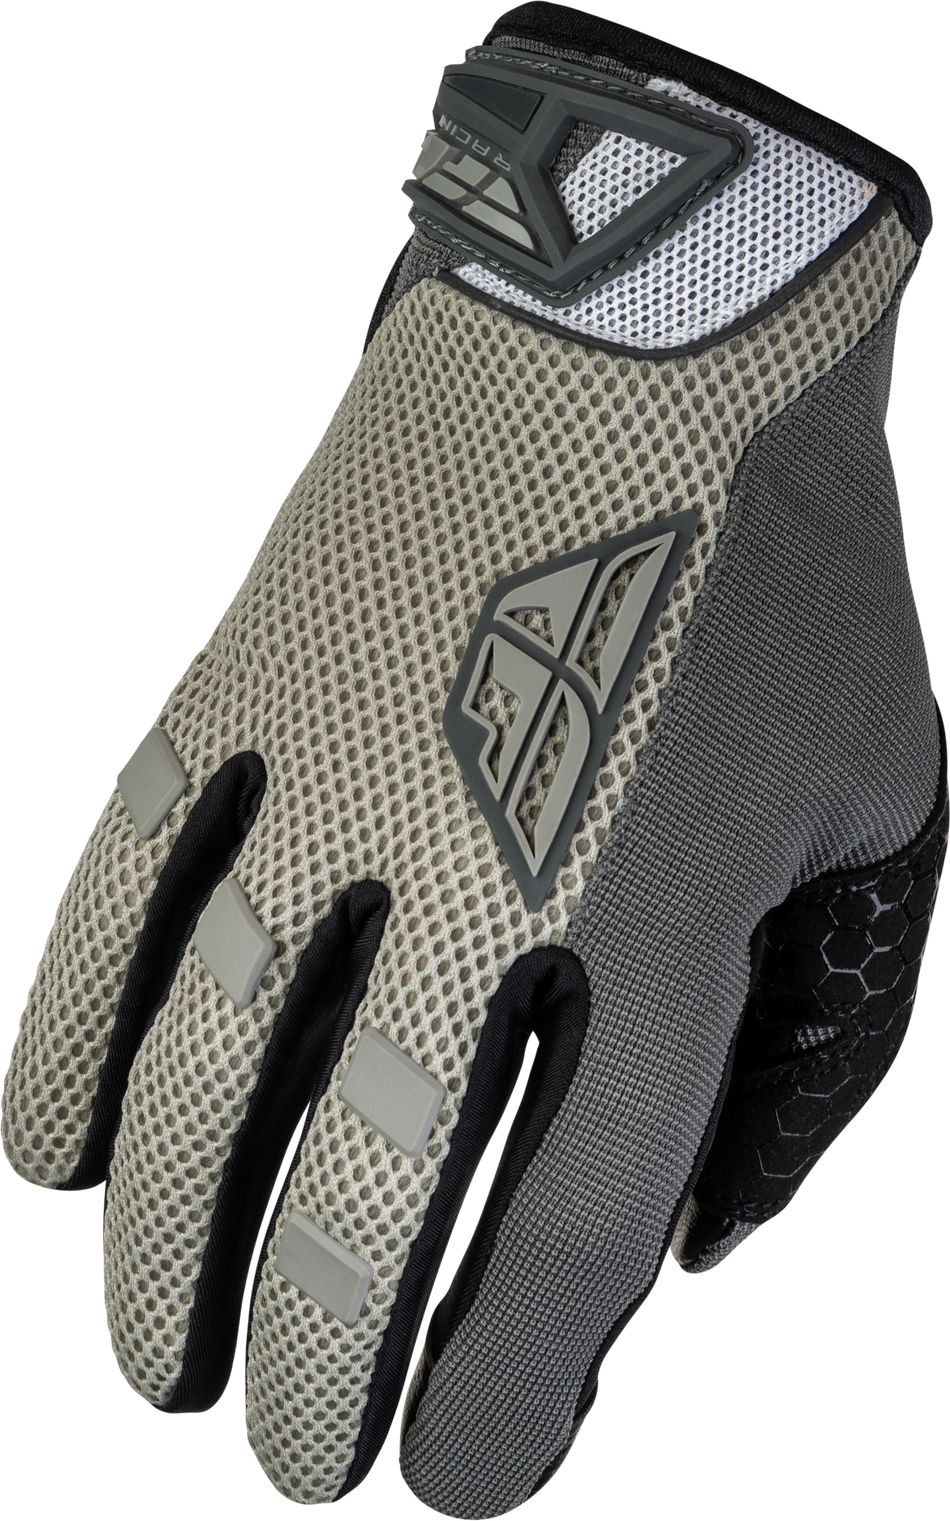 FLY RACING Women's Coolpro Gloves Grey Md 476-6215M